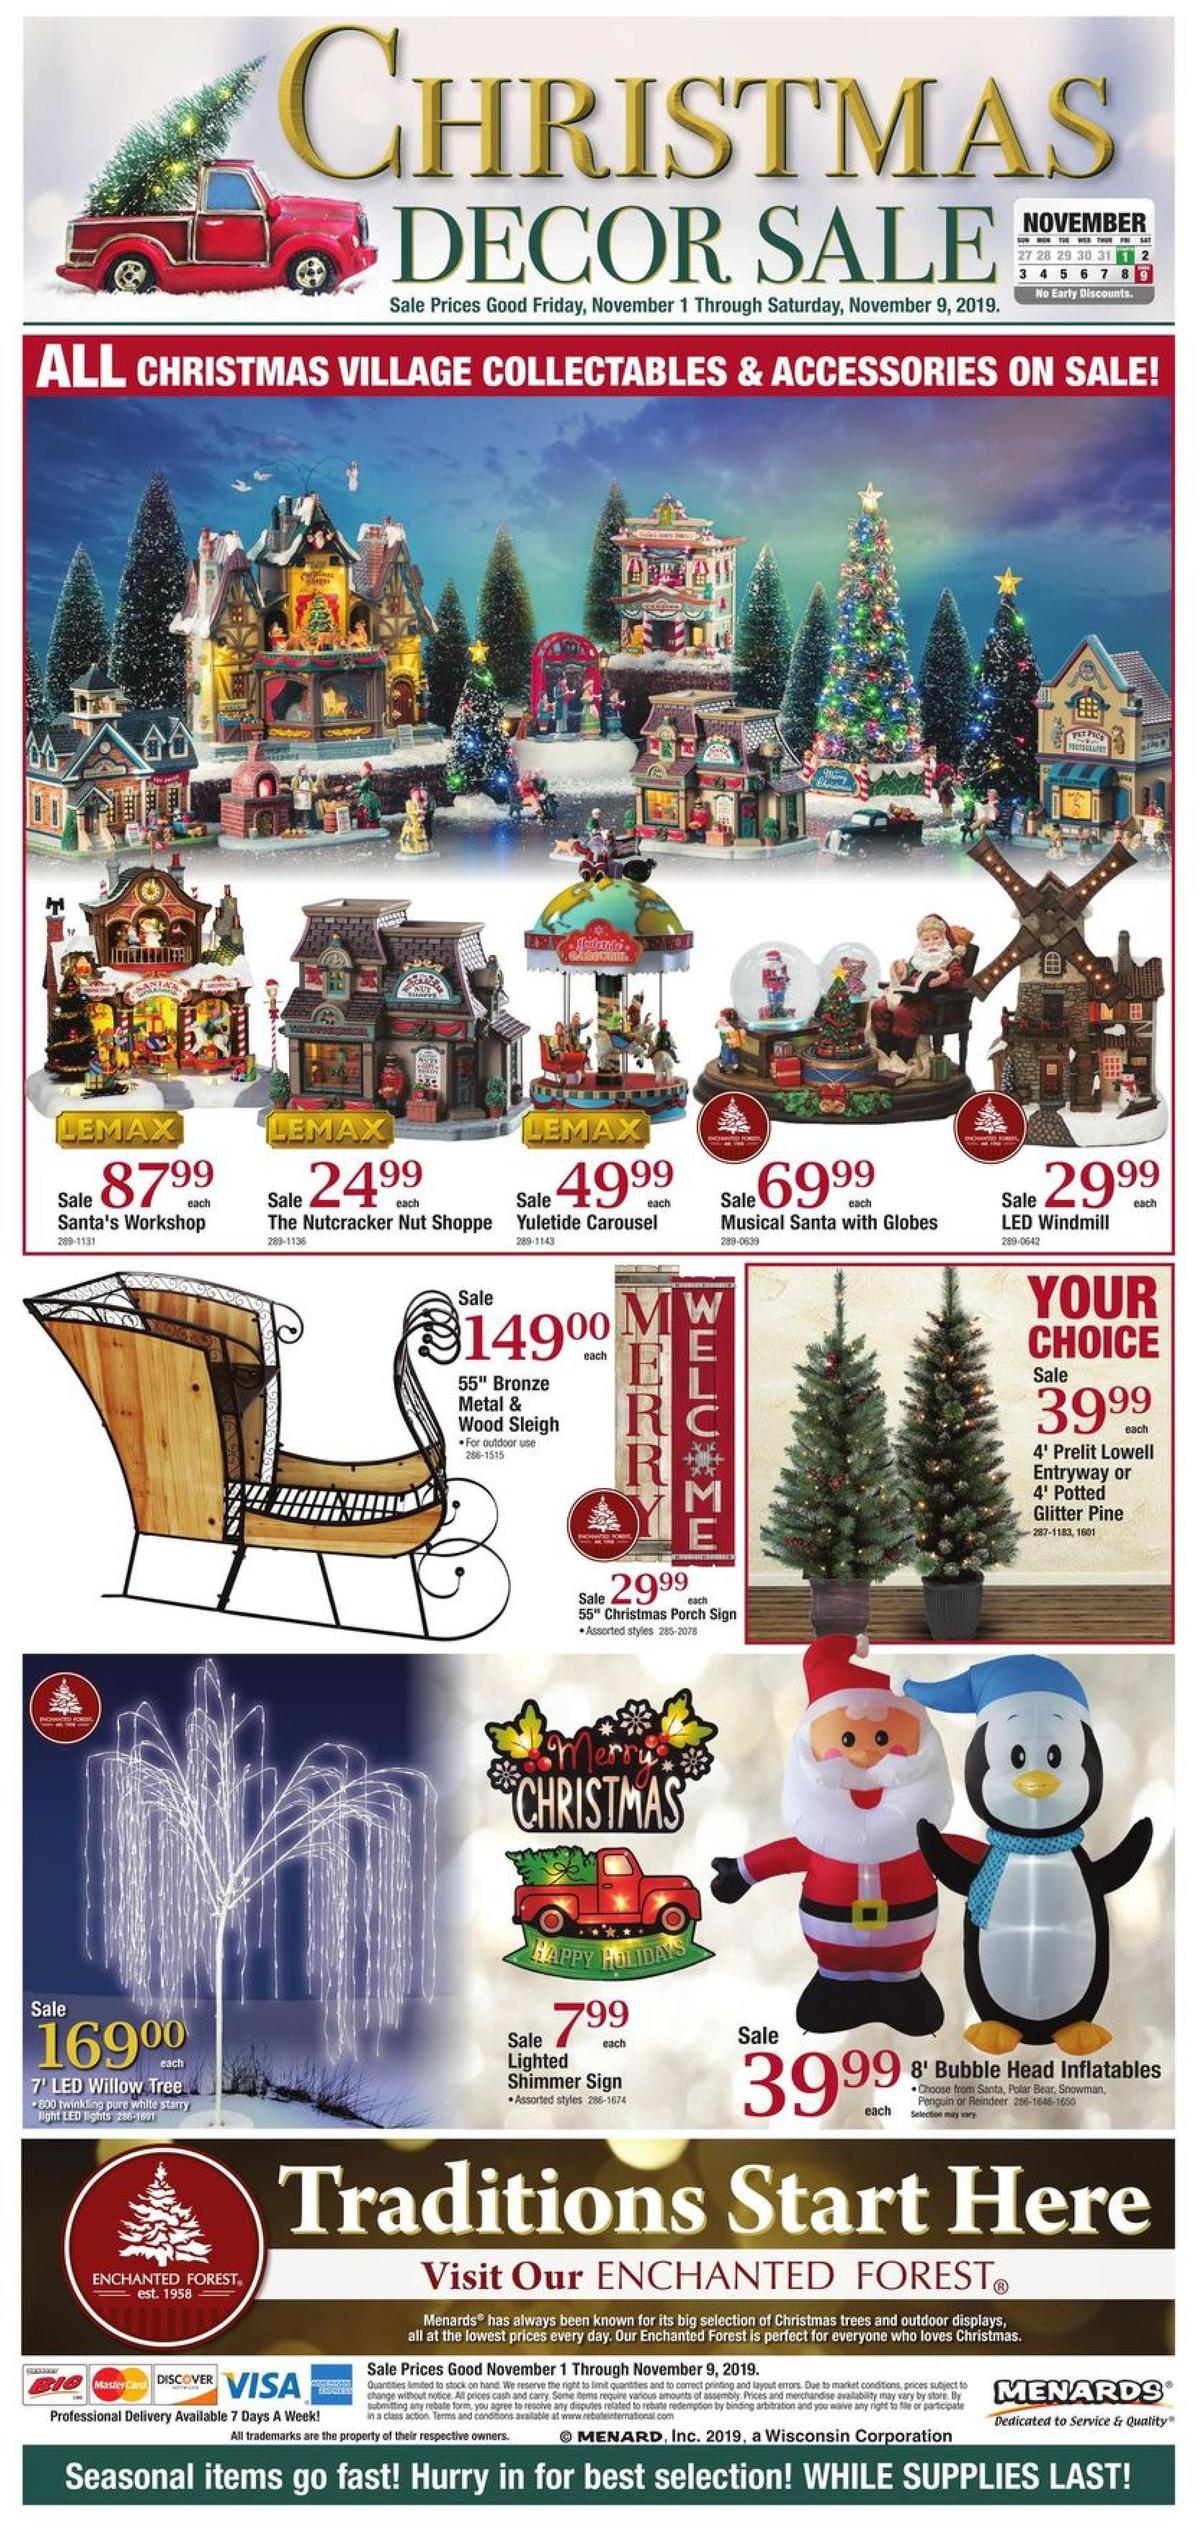 Menards Christmas Decor Sale Weekly Ad from November 1